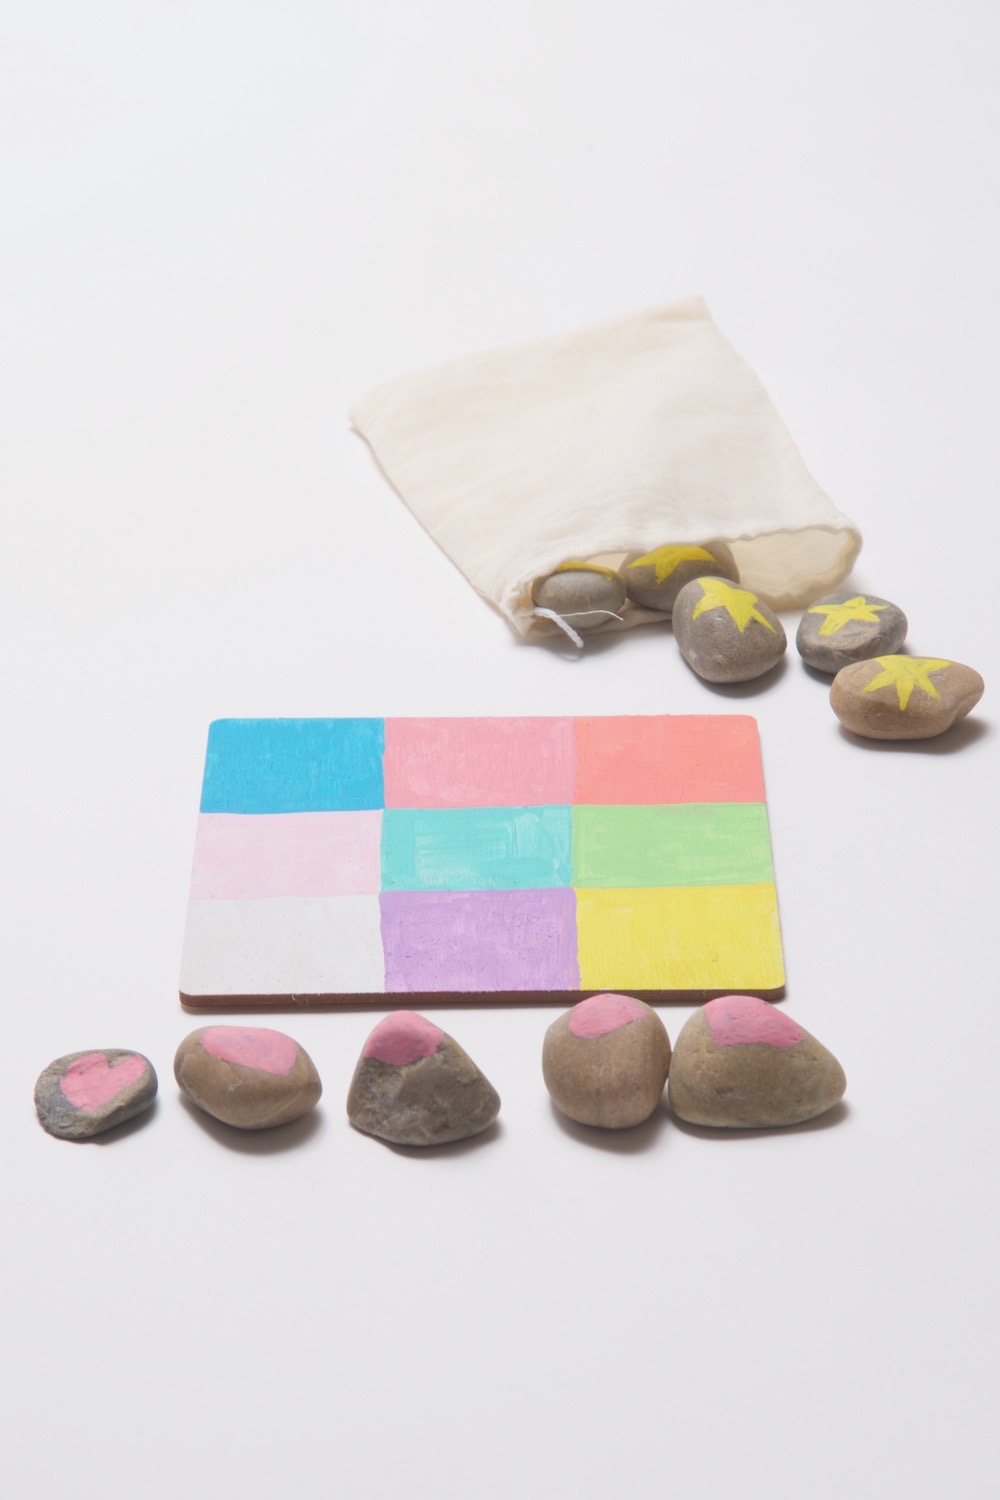 how to make a painted rock tic tac toe set